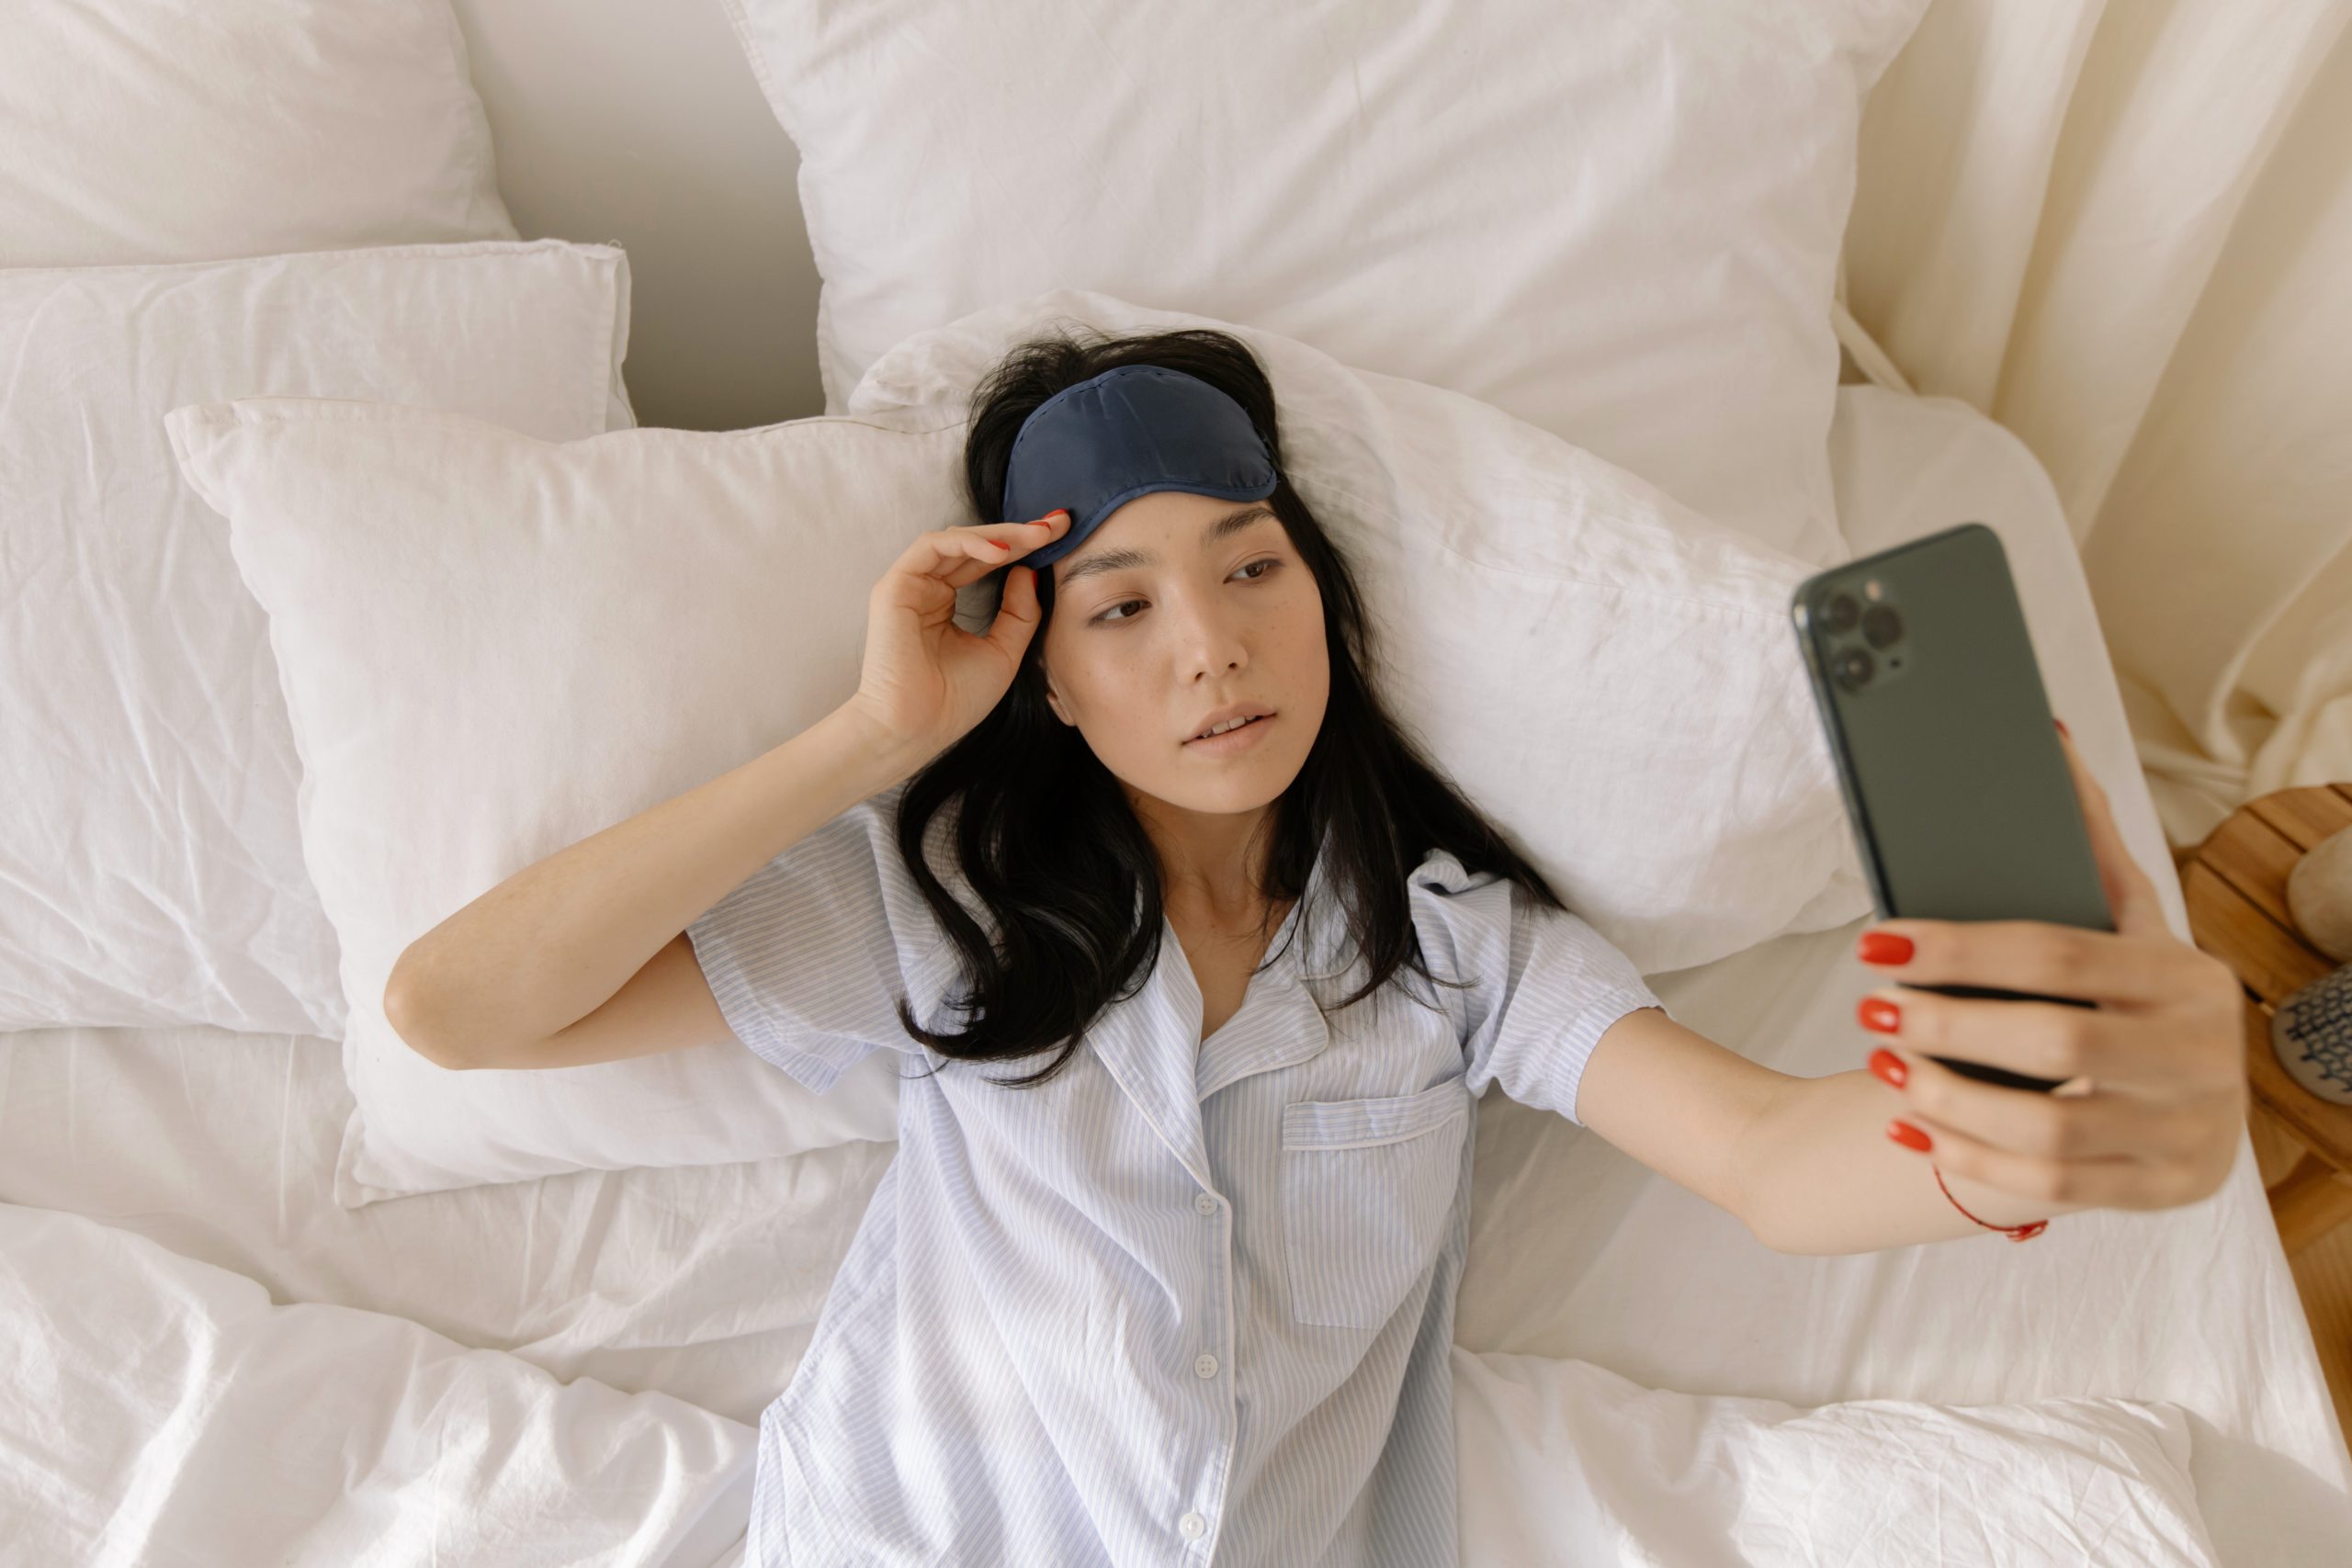 A woman is lying on her bed. She is taking a selfie on her smartphone.